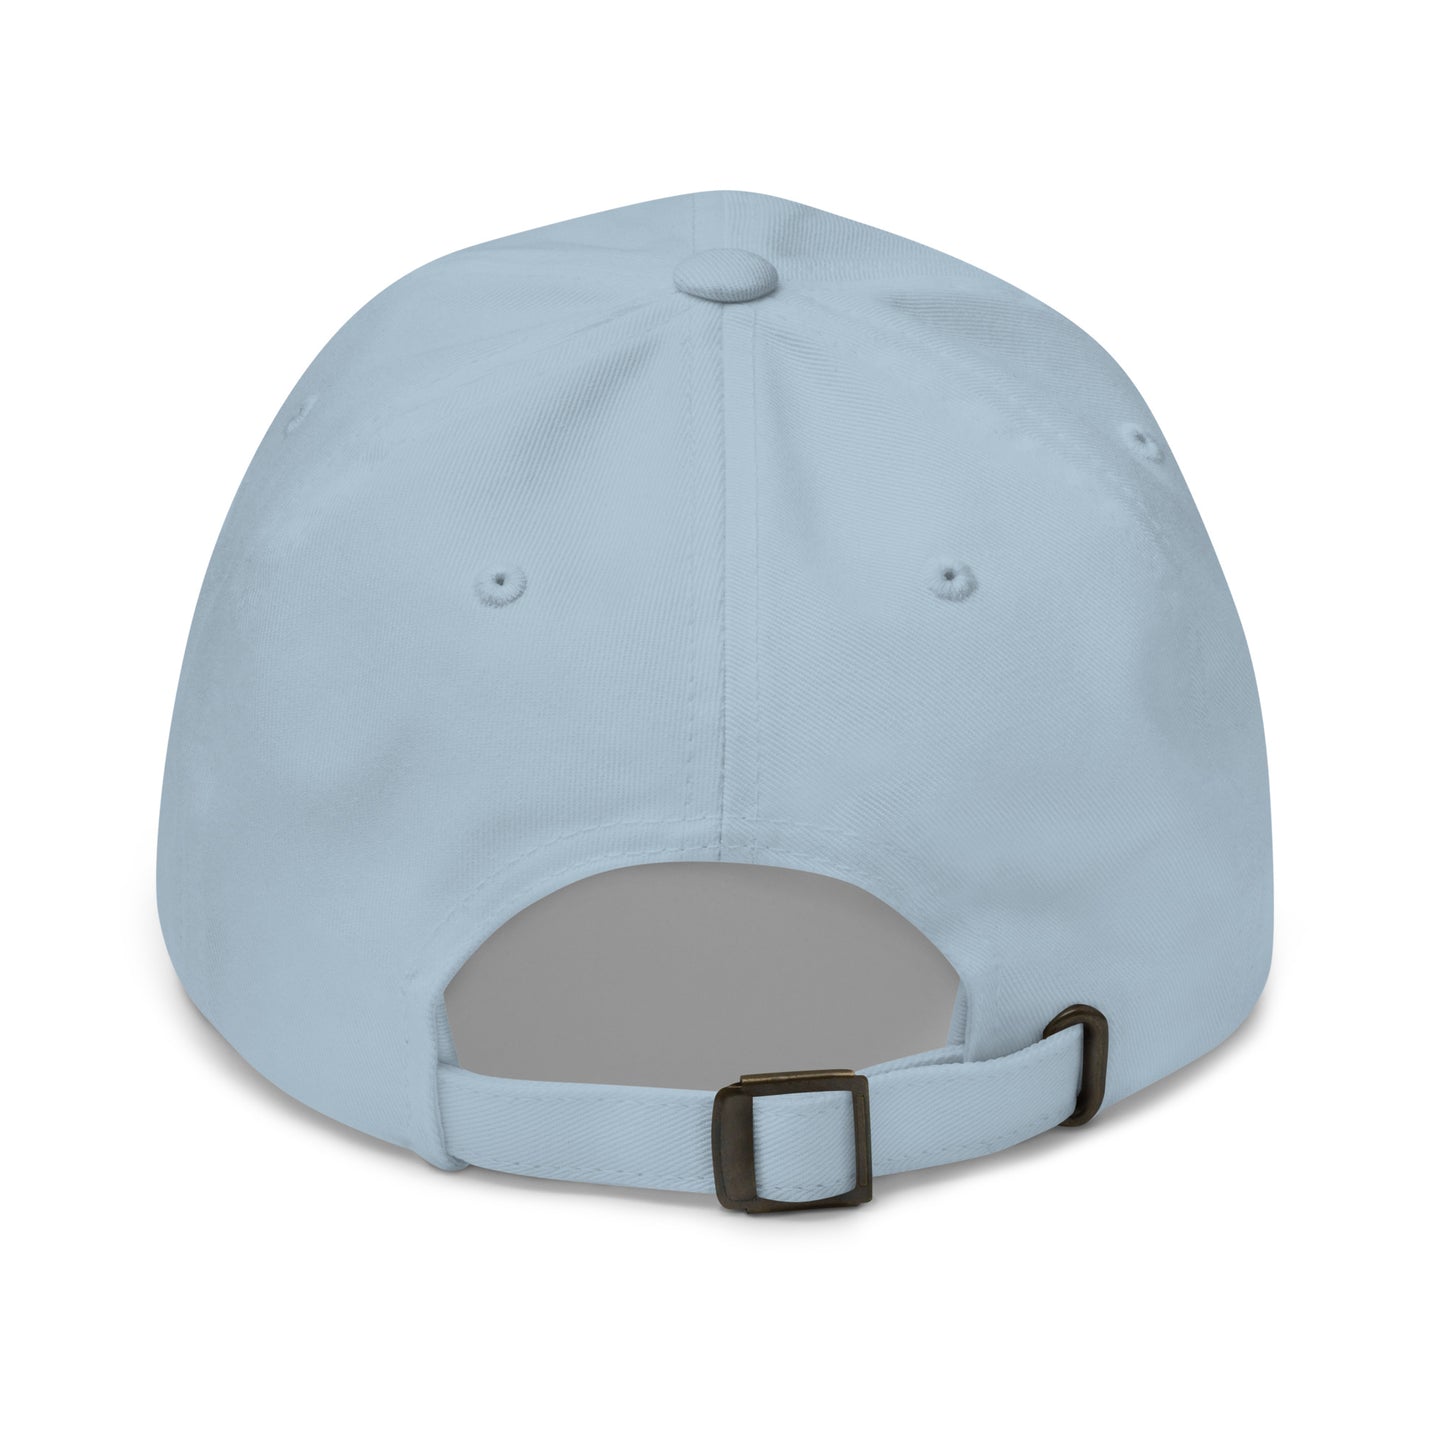 Dad hat but it's like a cool one